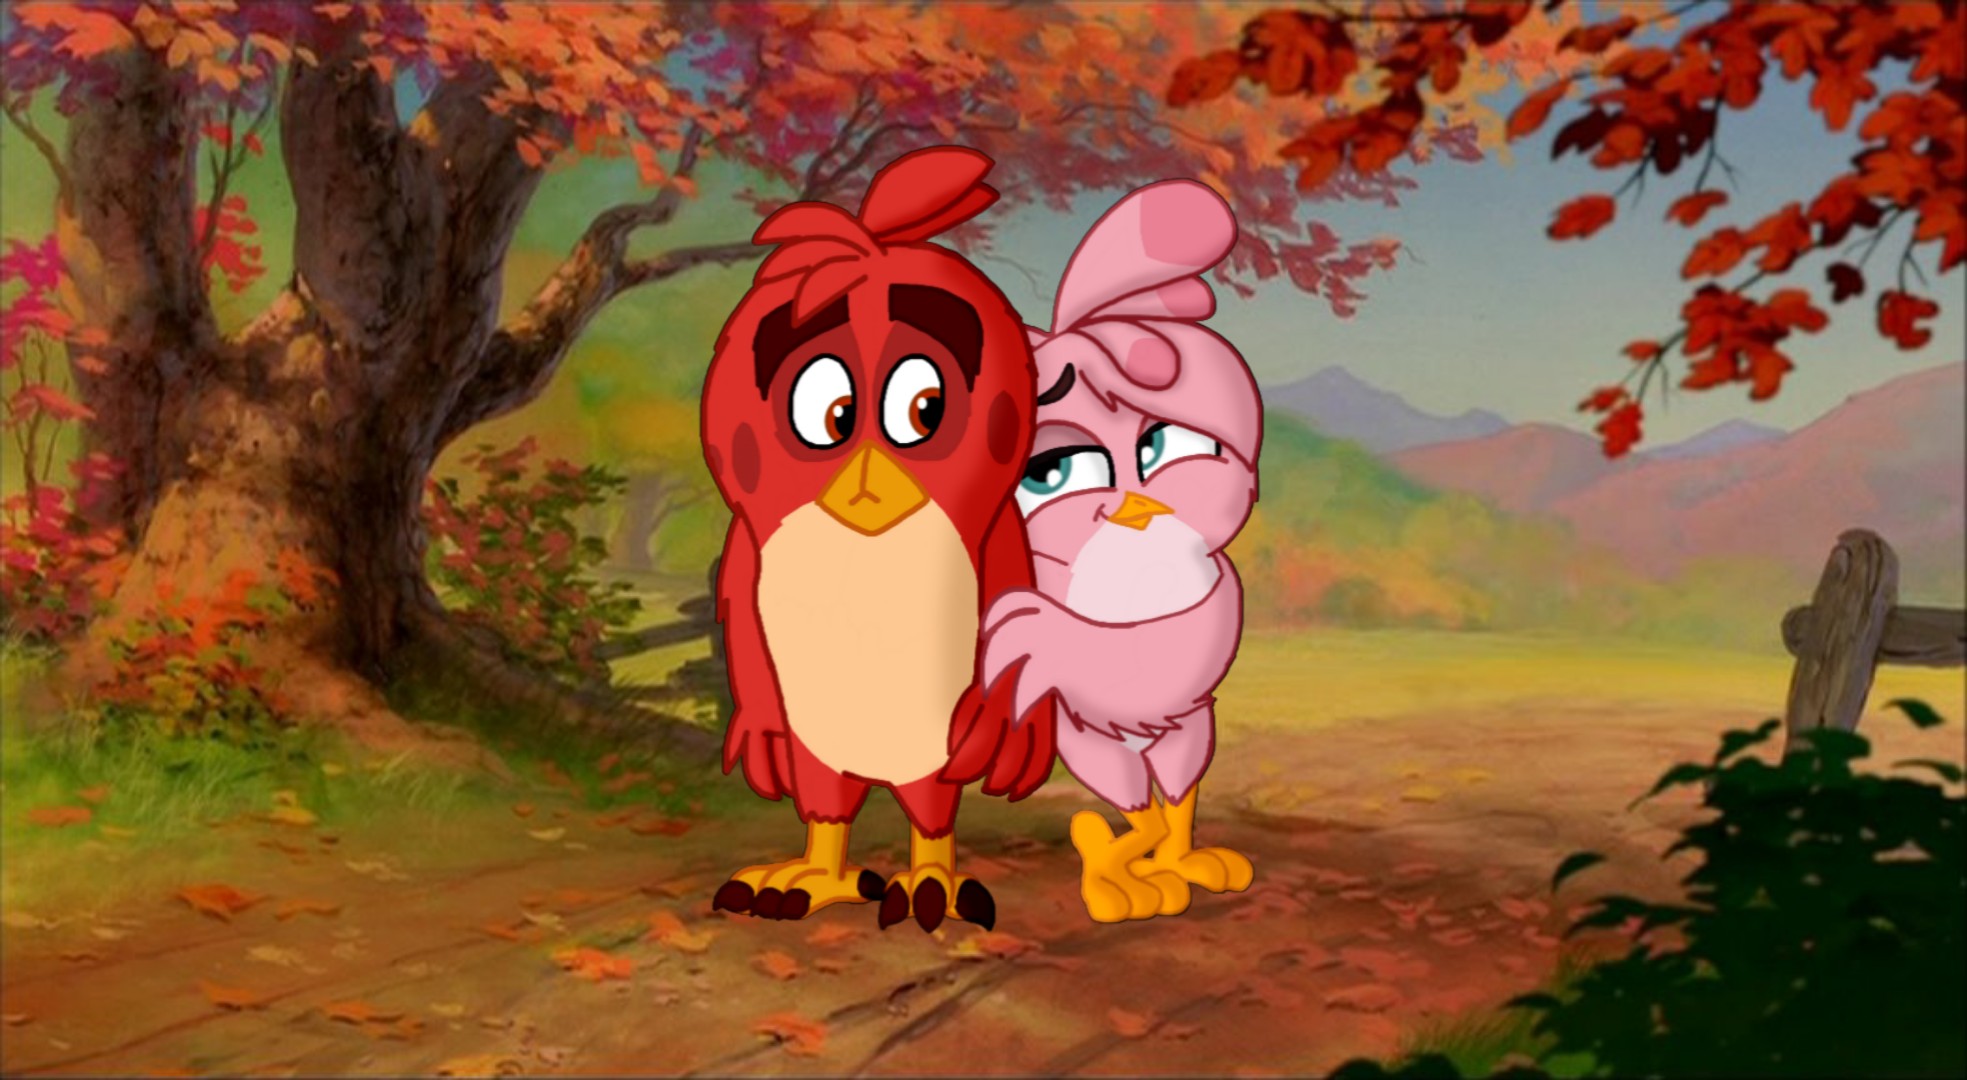 Christopher Ruiz On Twitter Red And Stella Are First Date Angrybirds Disneyanimation Redella Redxstella - chris roblox the first on twitter congratulations